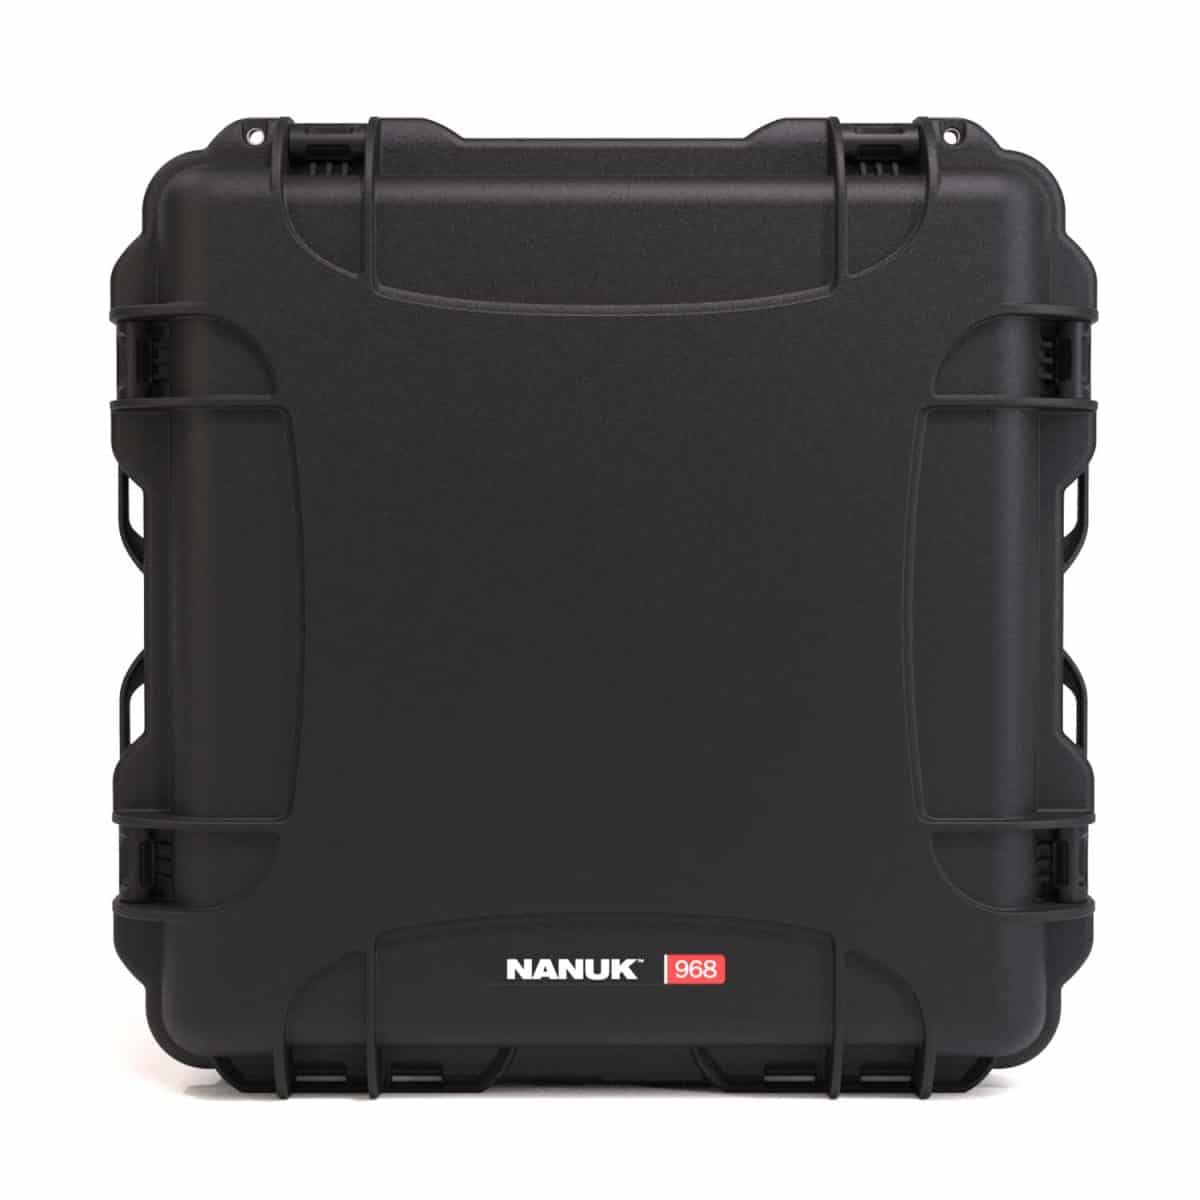 NANUK 968 Plastic Injection Molded Carry Case – Armor Road Cases